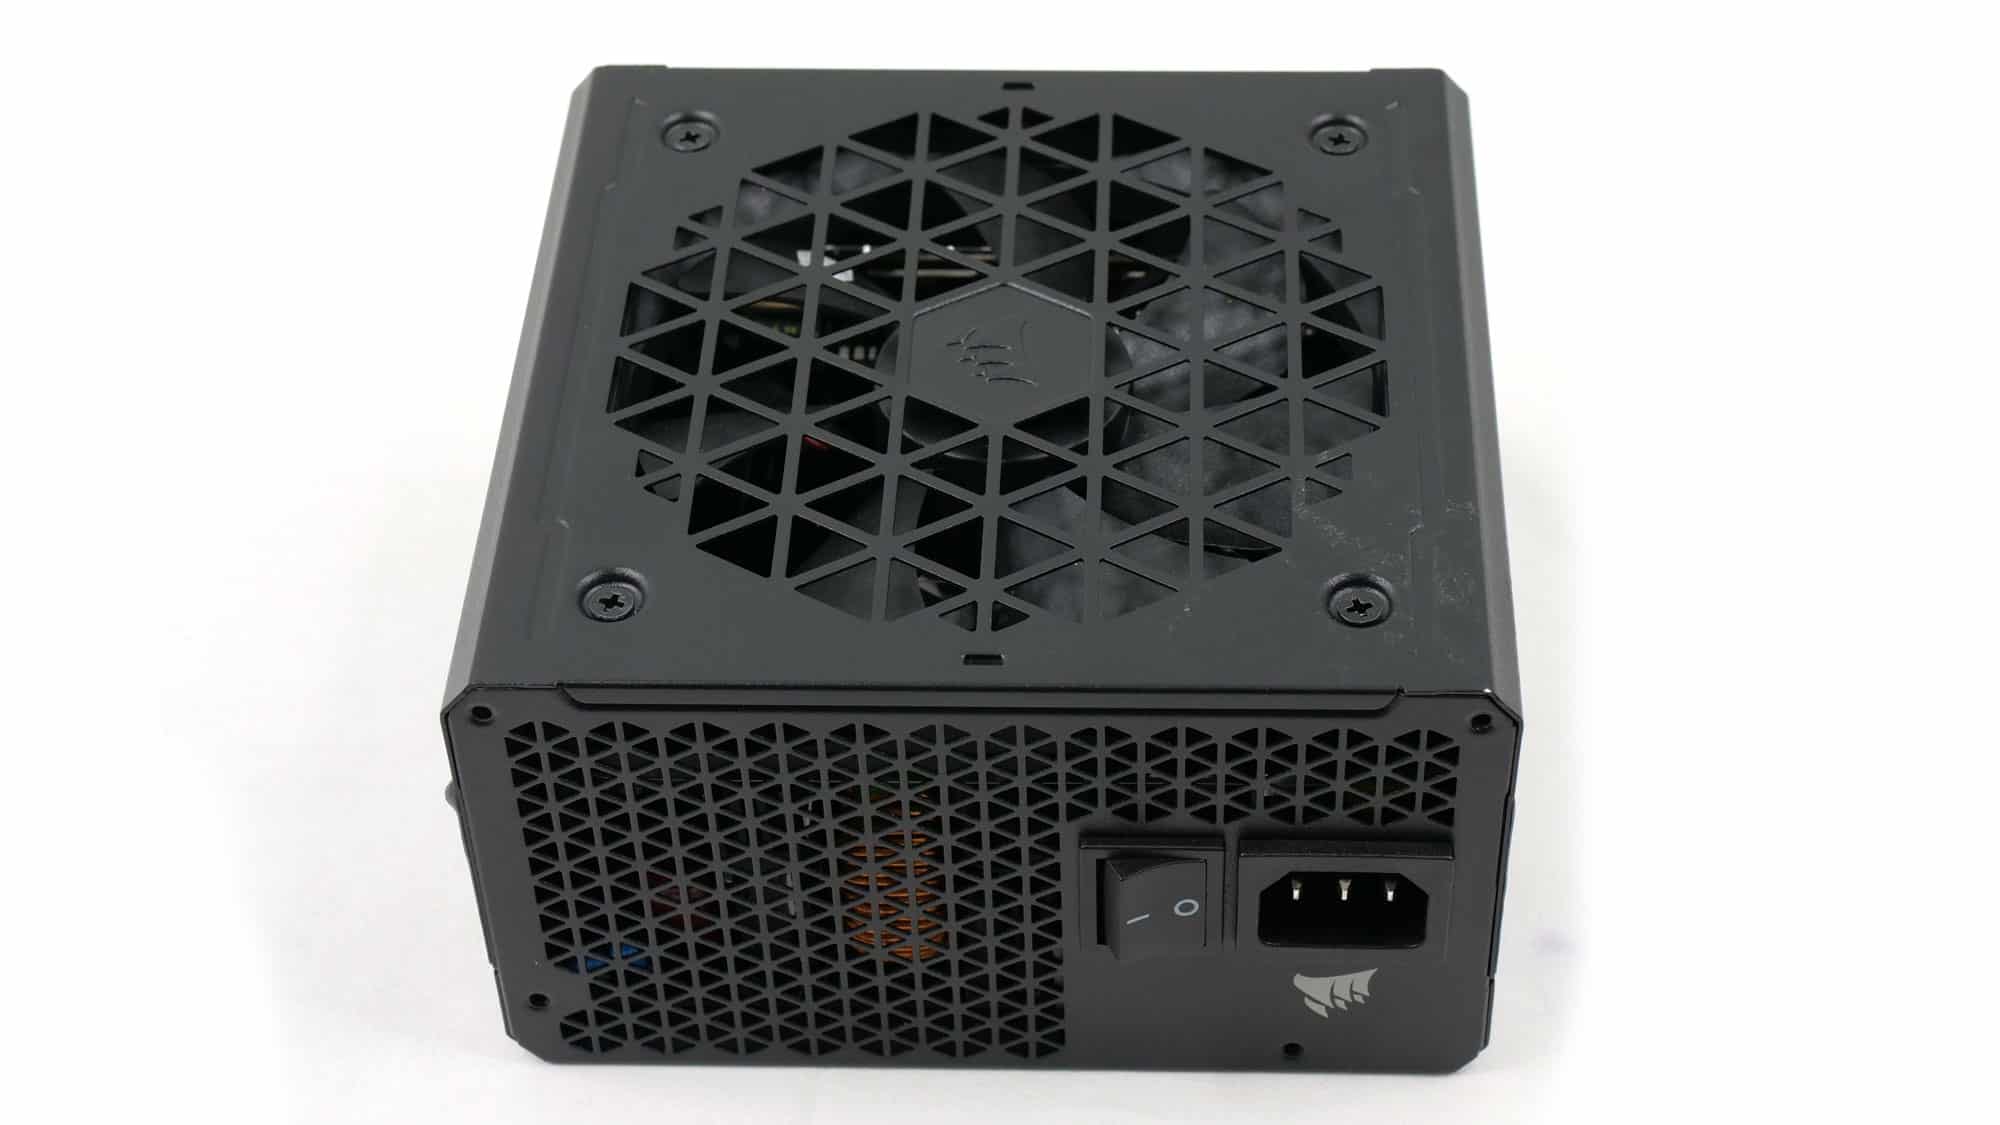 Corsair RM1000e (2023) Gen5 PSU Review - Page 11 of 11 - Hardware Busters